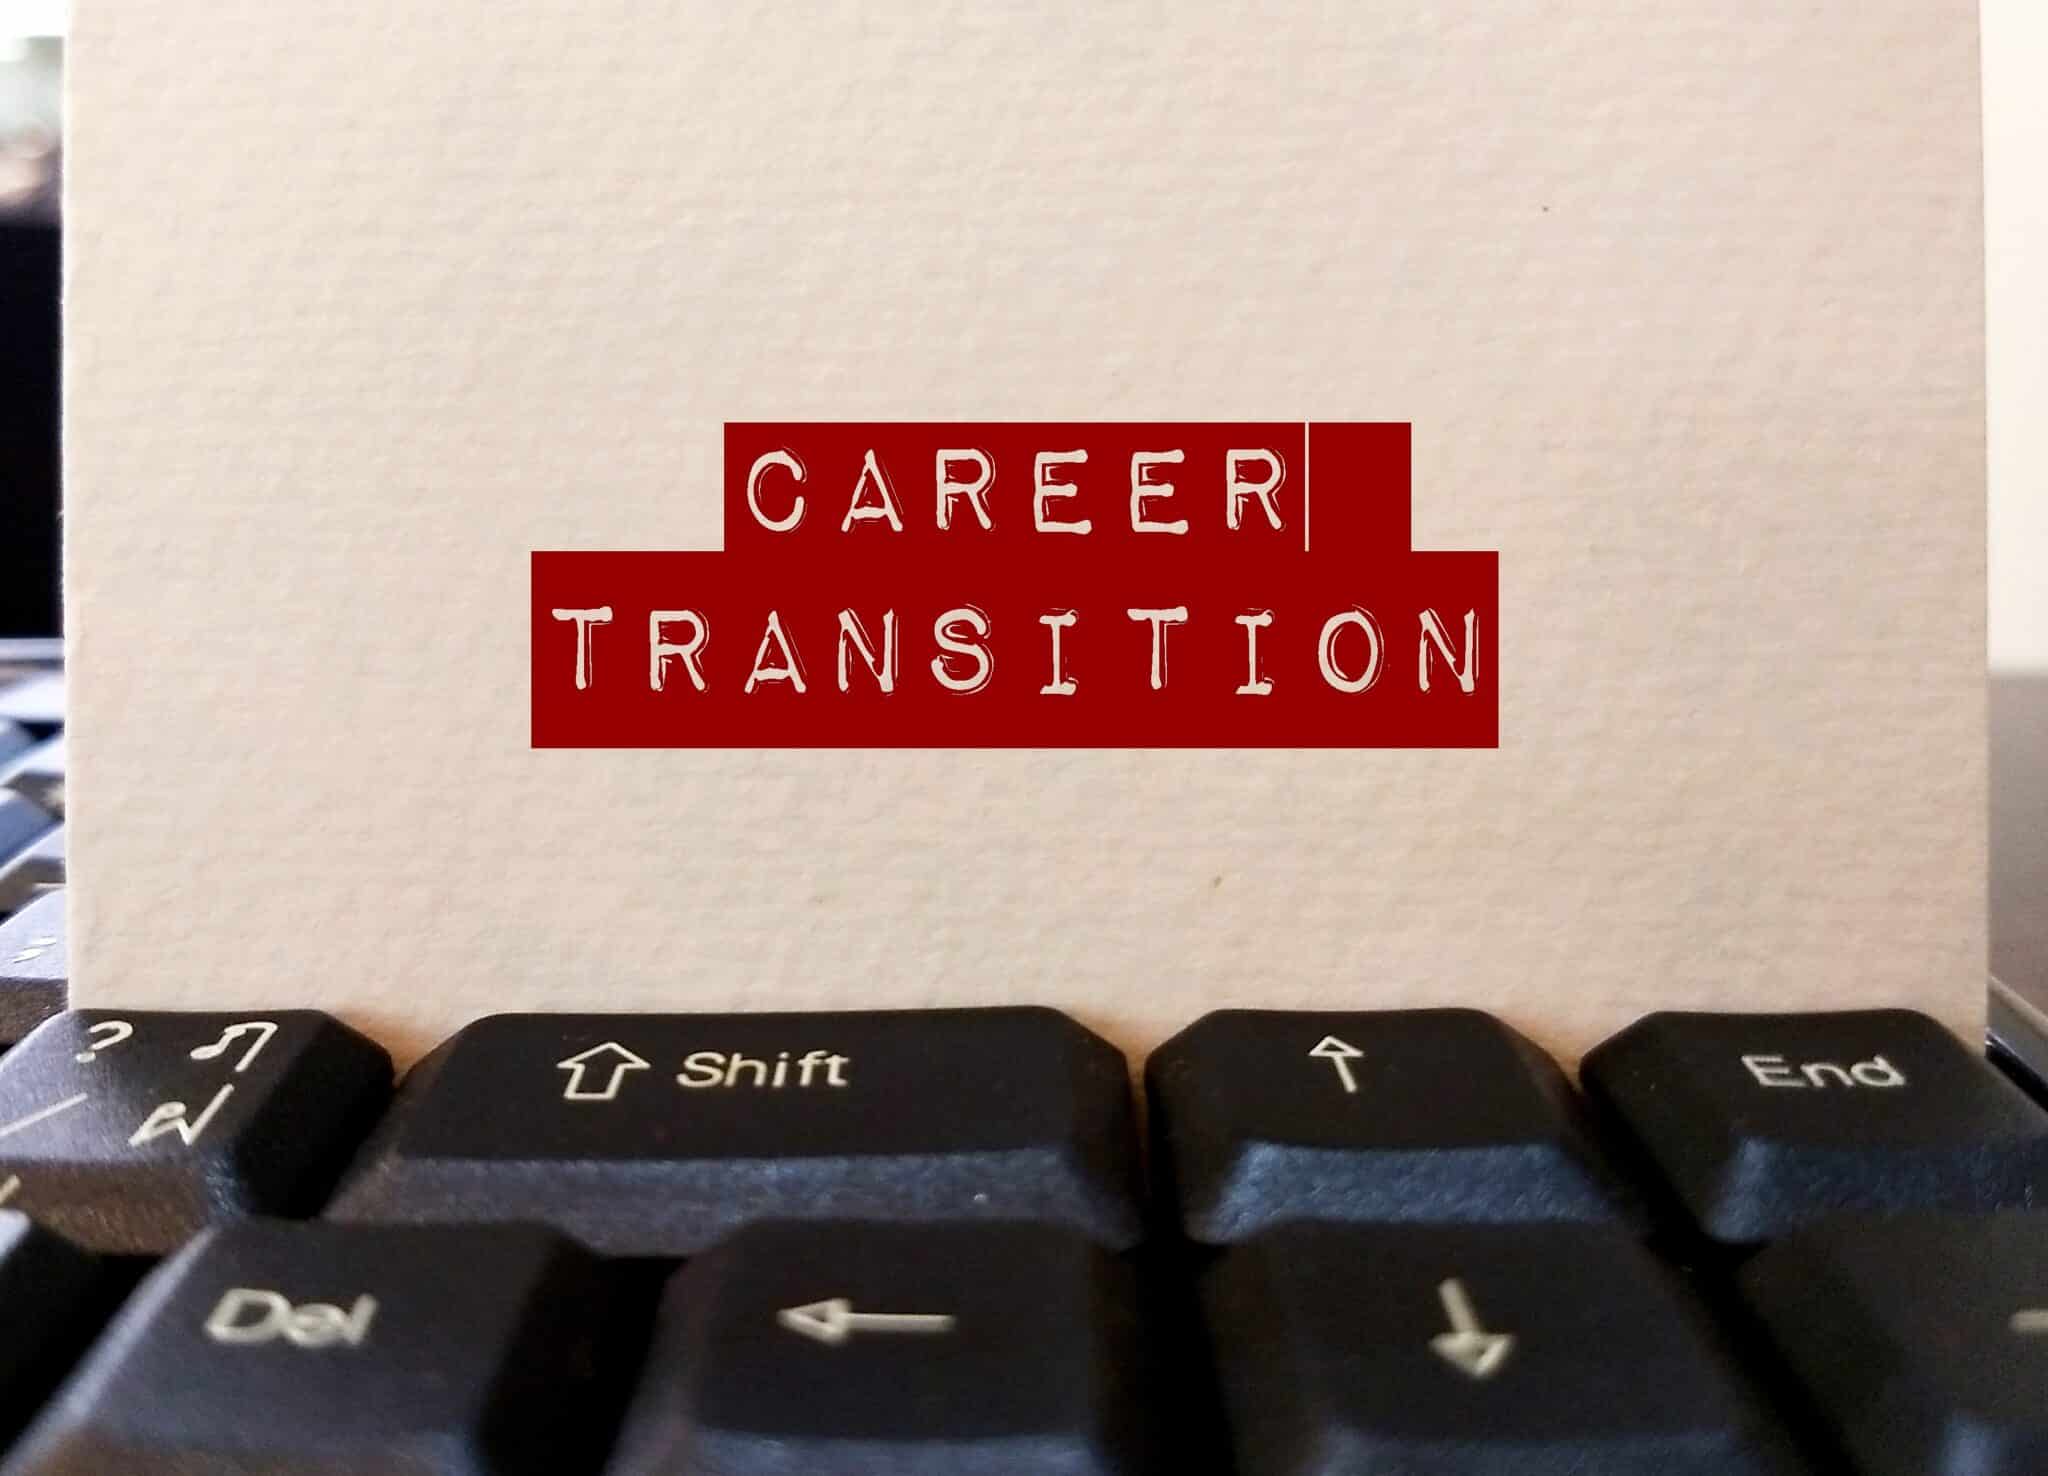 Keyboard with 'CAREER TRANSITION' note indicating a job change ahead for a medical transcriptionist.